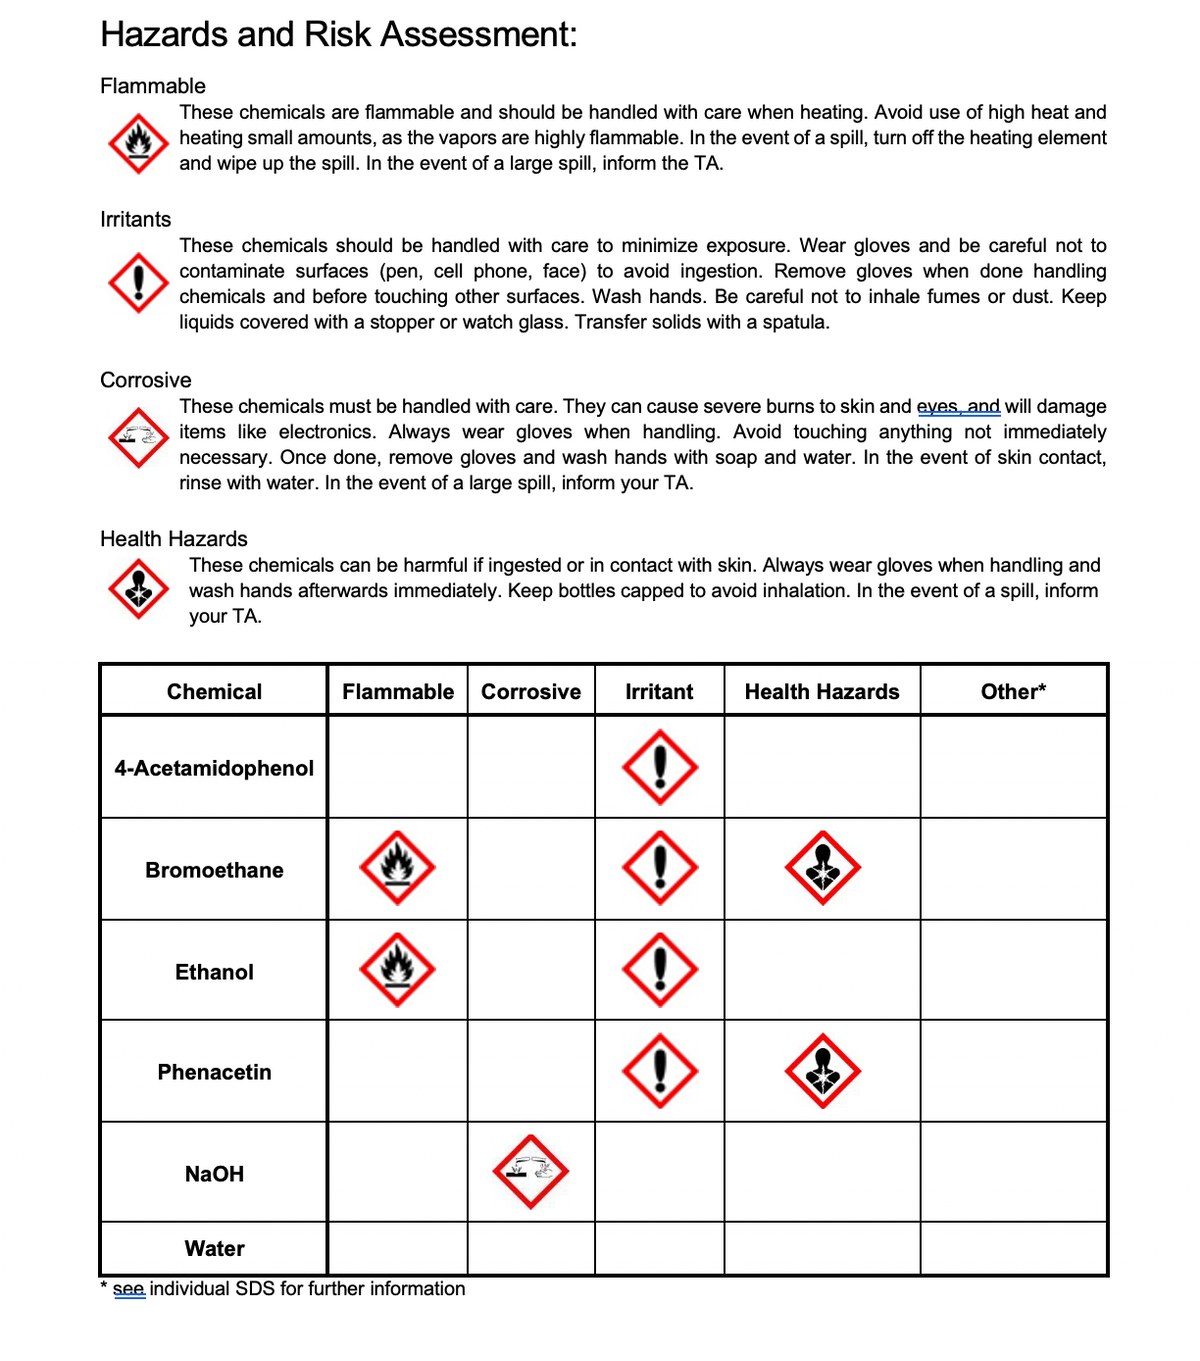 Hazards and Risk Assessment:
Flammable
These chemicals are flammable and should be handled with care when heating. Avoid use of high heat and
heating small amounts, as the vapors are highly flammable. In the event of a spill, turn off the heating element
and wipe up the spill. In the event of a large spill, inform the TA.
Irritants
These chemicals should be handled with care to minimize exposure. Wear gloves and be careful not to
contaminate surfaces (pen, cell phone, face) to avoid ingestion. Remove gloves when done handling
chemicals and before touching other surfaces. Wash hands. Be careful not to inhale fumes or dust. Keep
liquids covered with a stopper or watch glass. Transfer solids with a spatula.
Corrosive
These chemicals must be handled with care. They can cause severe burns to skin and eyes and will damage
items like electronics. Always wear gloves when handling. Avoid touching anything not immediately
necessary. Once done, remove gloves and wash hands with soap and water. In the event of skin contact,
rinse with water. In the event of a large spill, inform your TA.
Health Hazards
These chemicals can be harmful if ingested or in contact with skin. Always wear gloves when handling and
wash hands afterwards immediately. Keep bottles capped to avoid inhalation. In the event of a spill, inform
your TA.
Chemical
Flammable
Corrosive
Irritant
Health Hazards
Other*
4-Acetamidophenol
Bromoethane
Ethanol
Phenacetin
NaOH
Water
see individual SDS for further information
